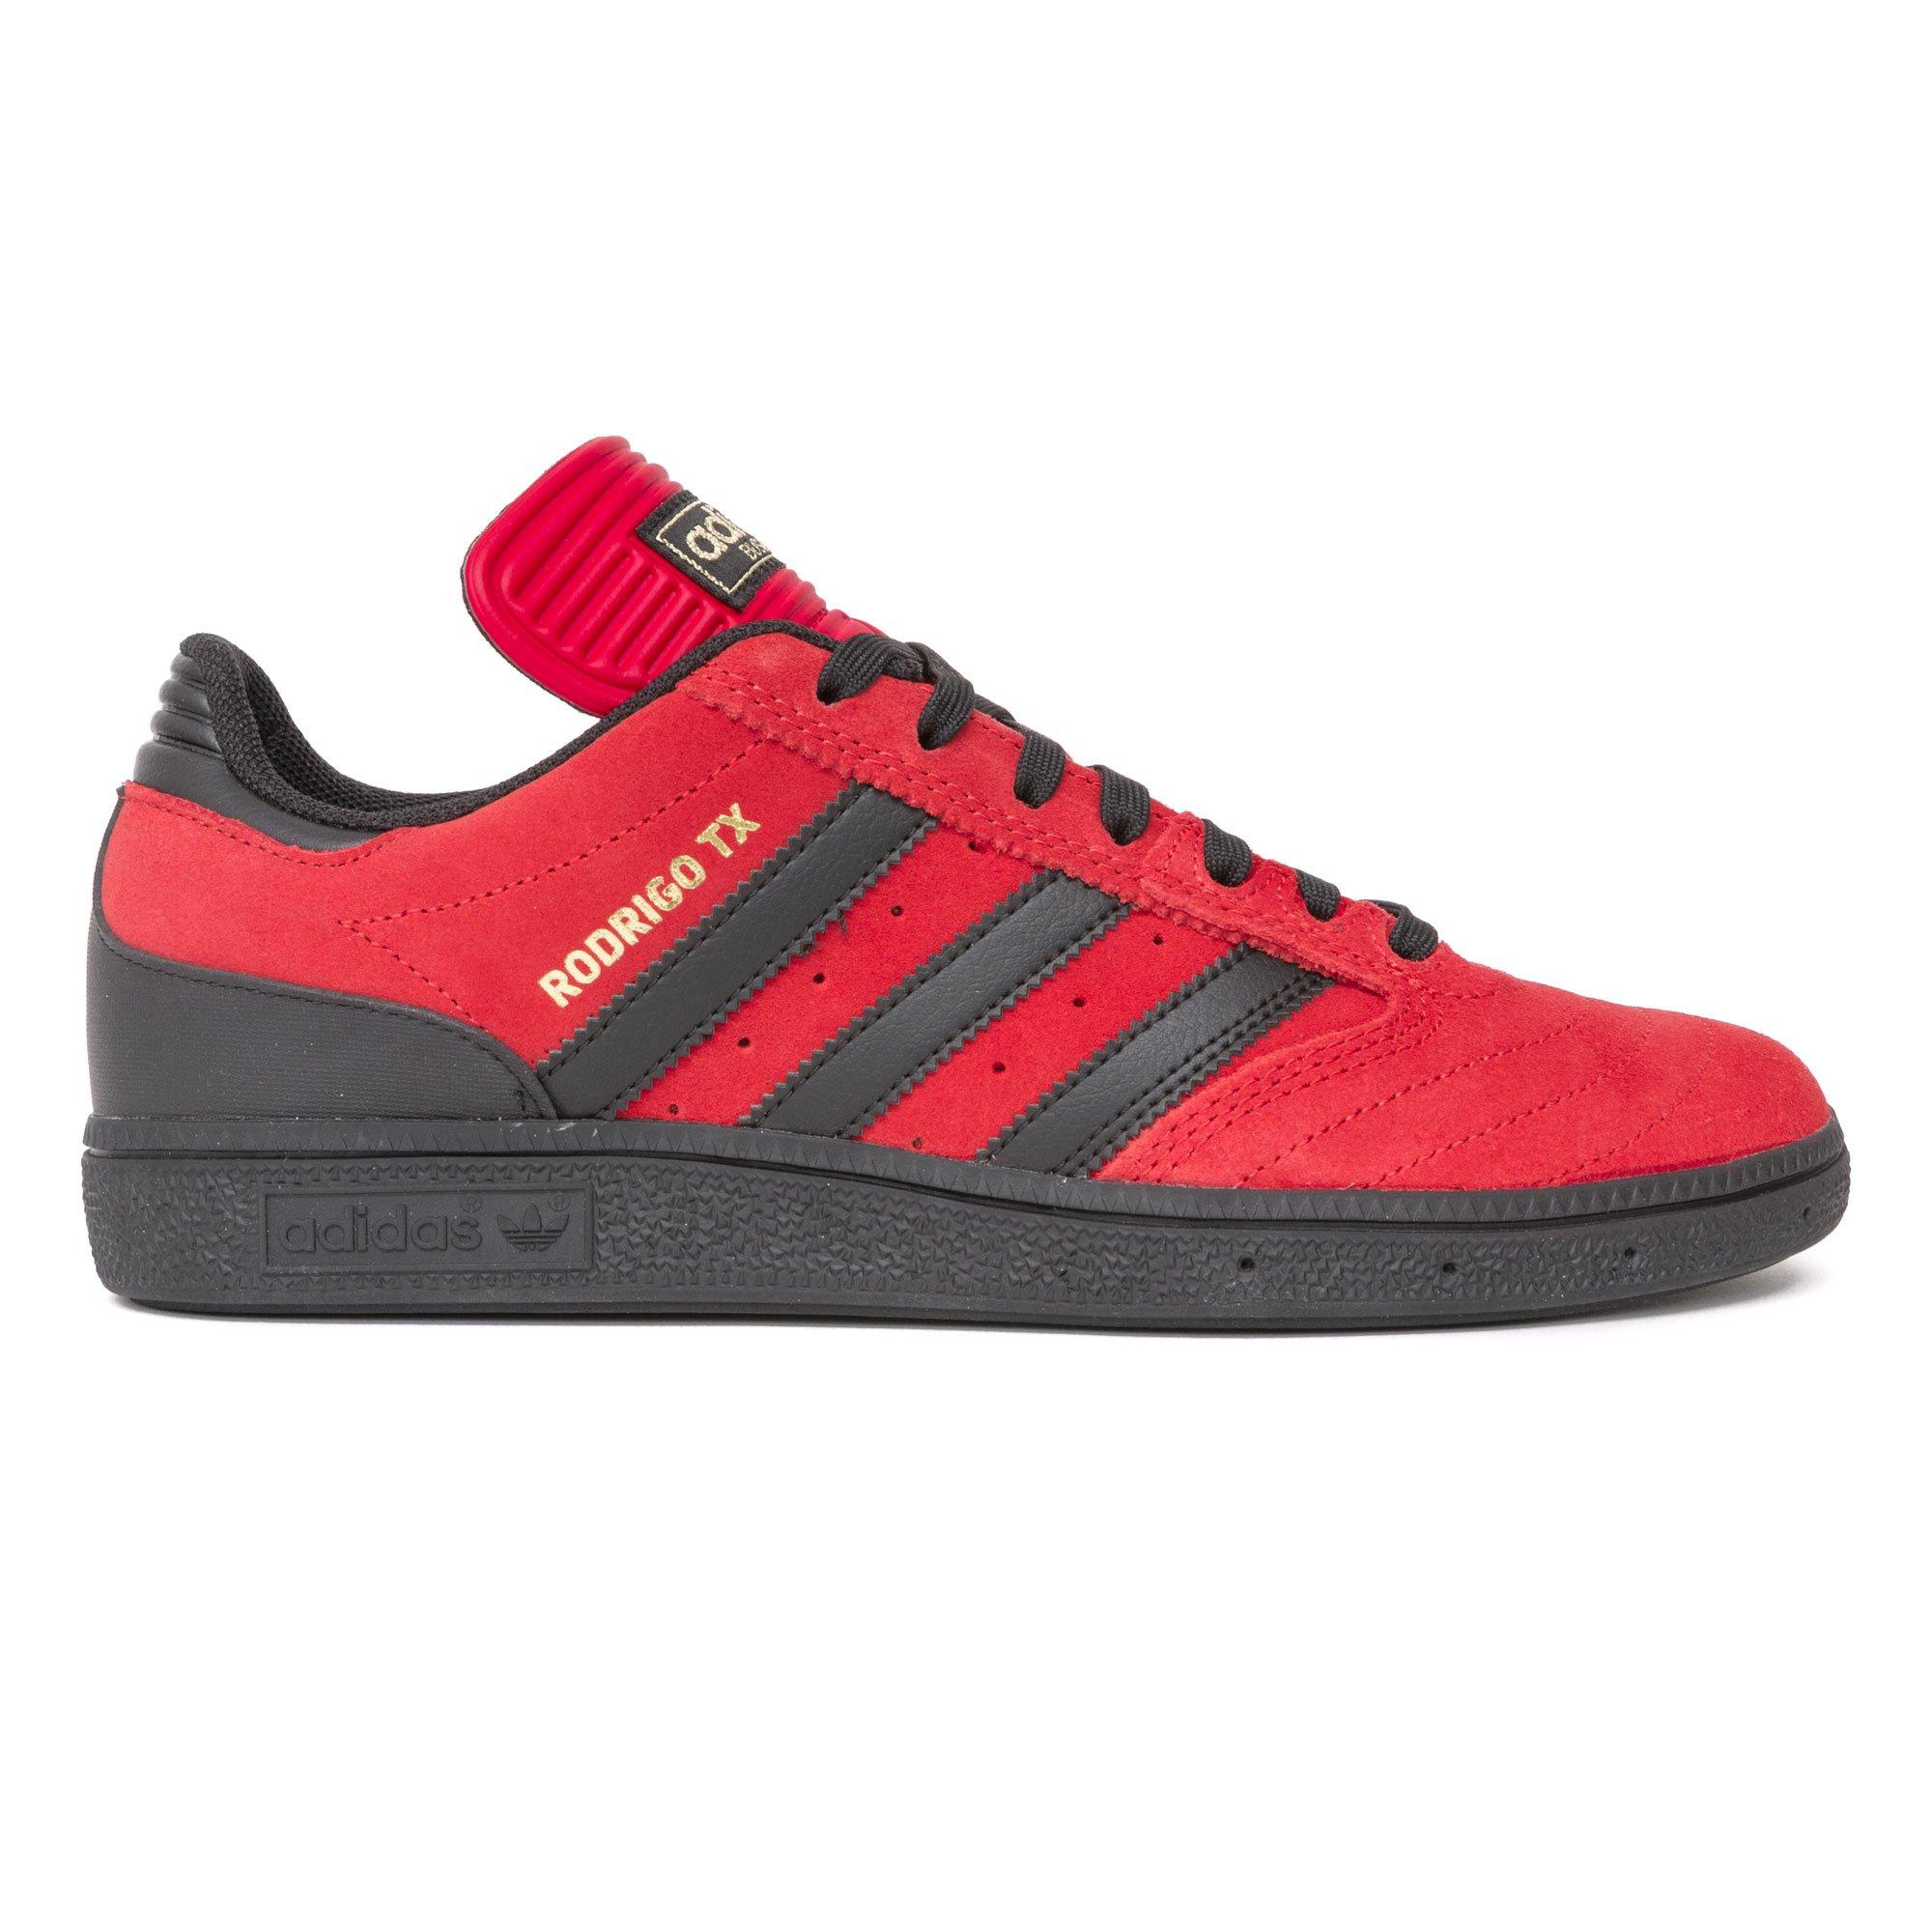 adidas Rubber Busenitz Shoes in Red for Men - Lyst